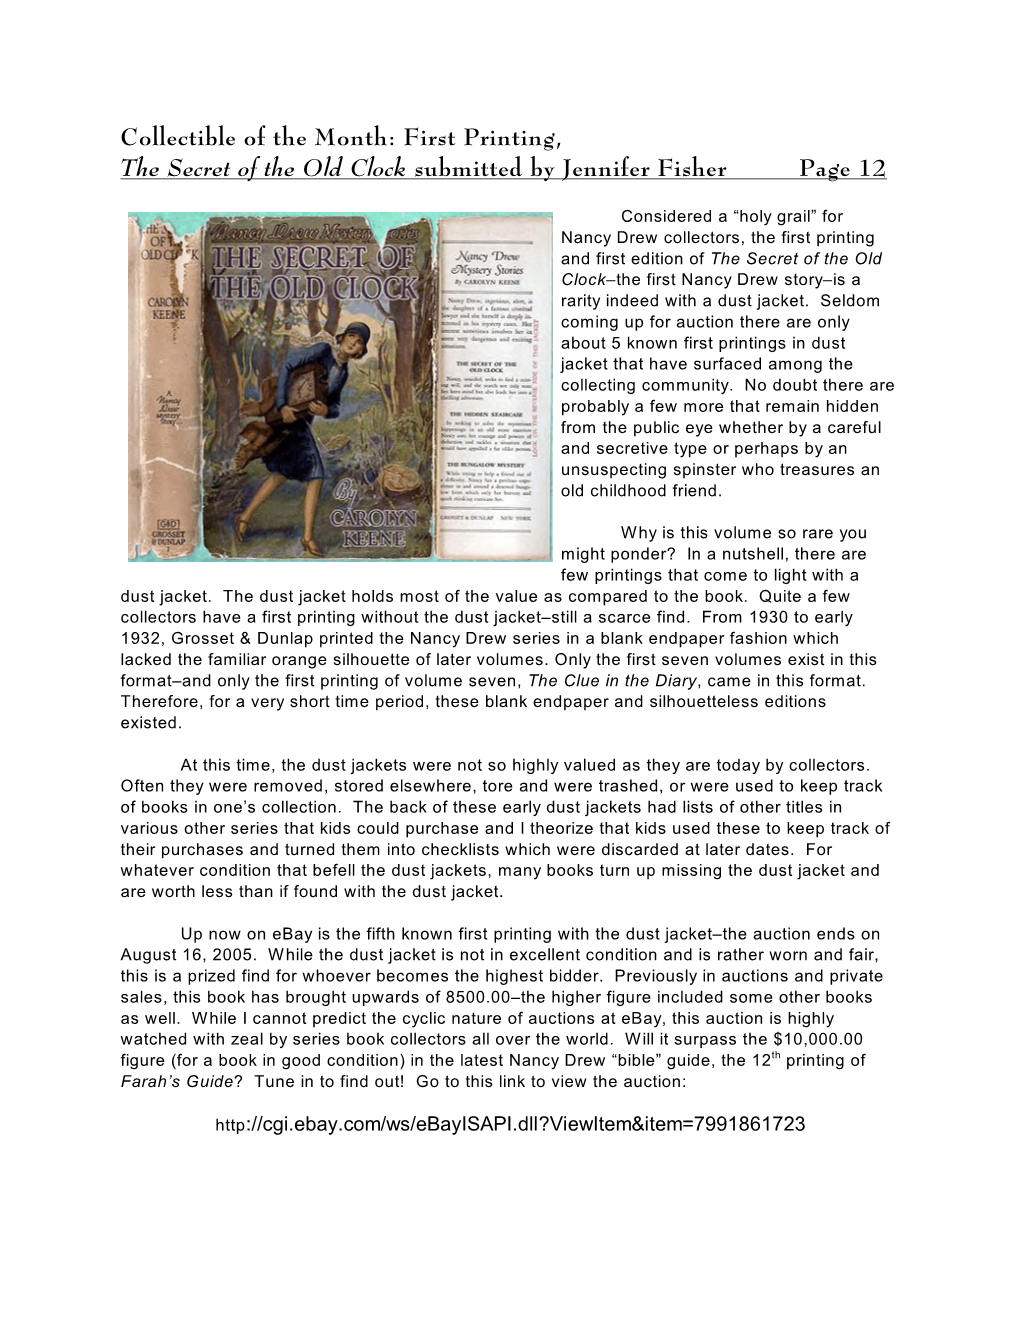 Collectible of the Month: First Printing, the Secret of the Old Clock Submitted by Jennifer Fisher Page 12